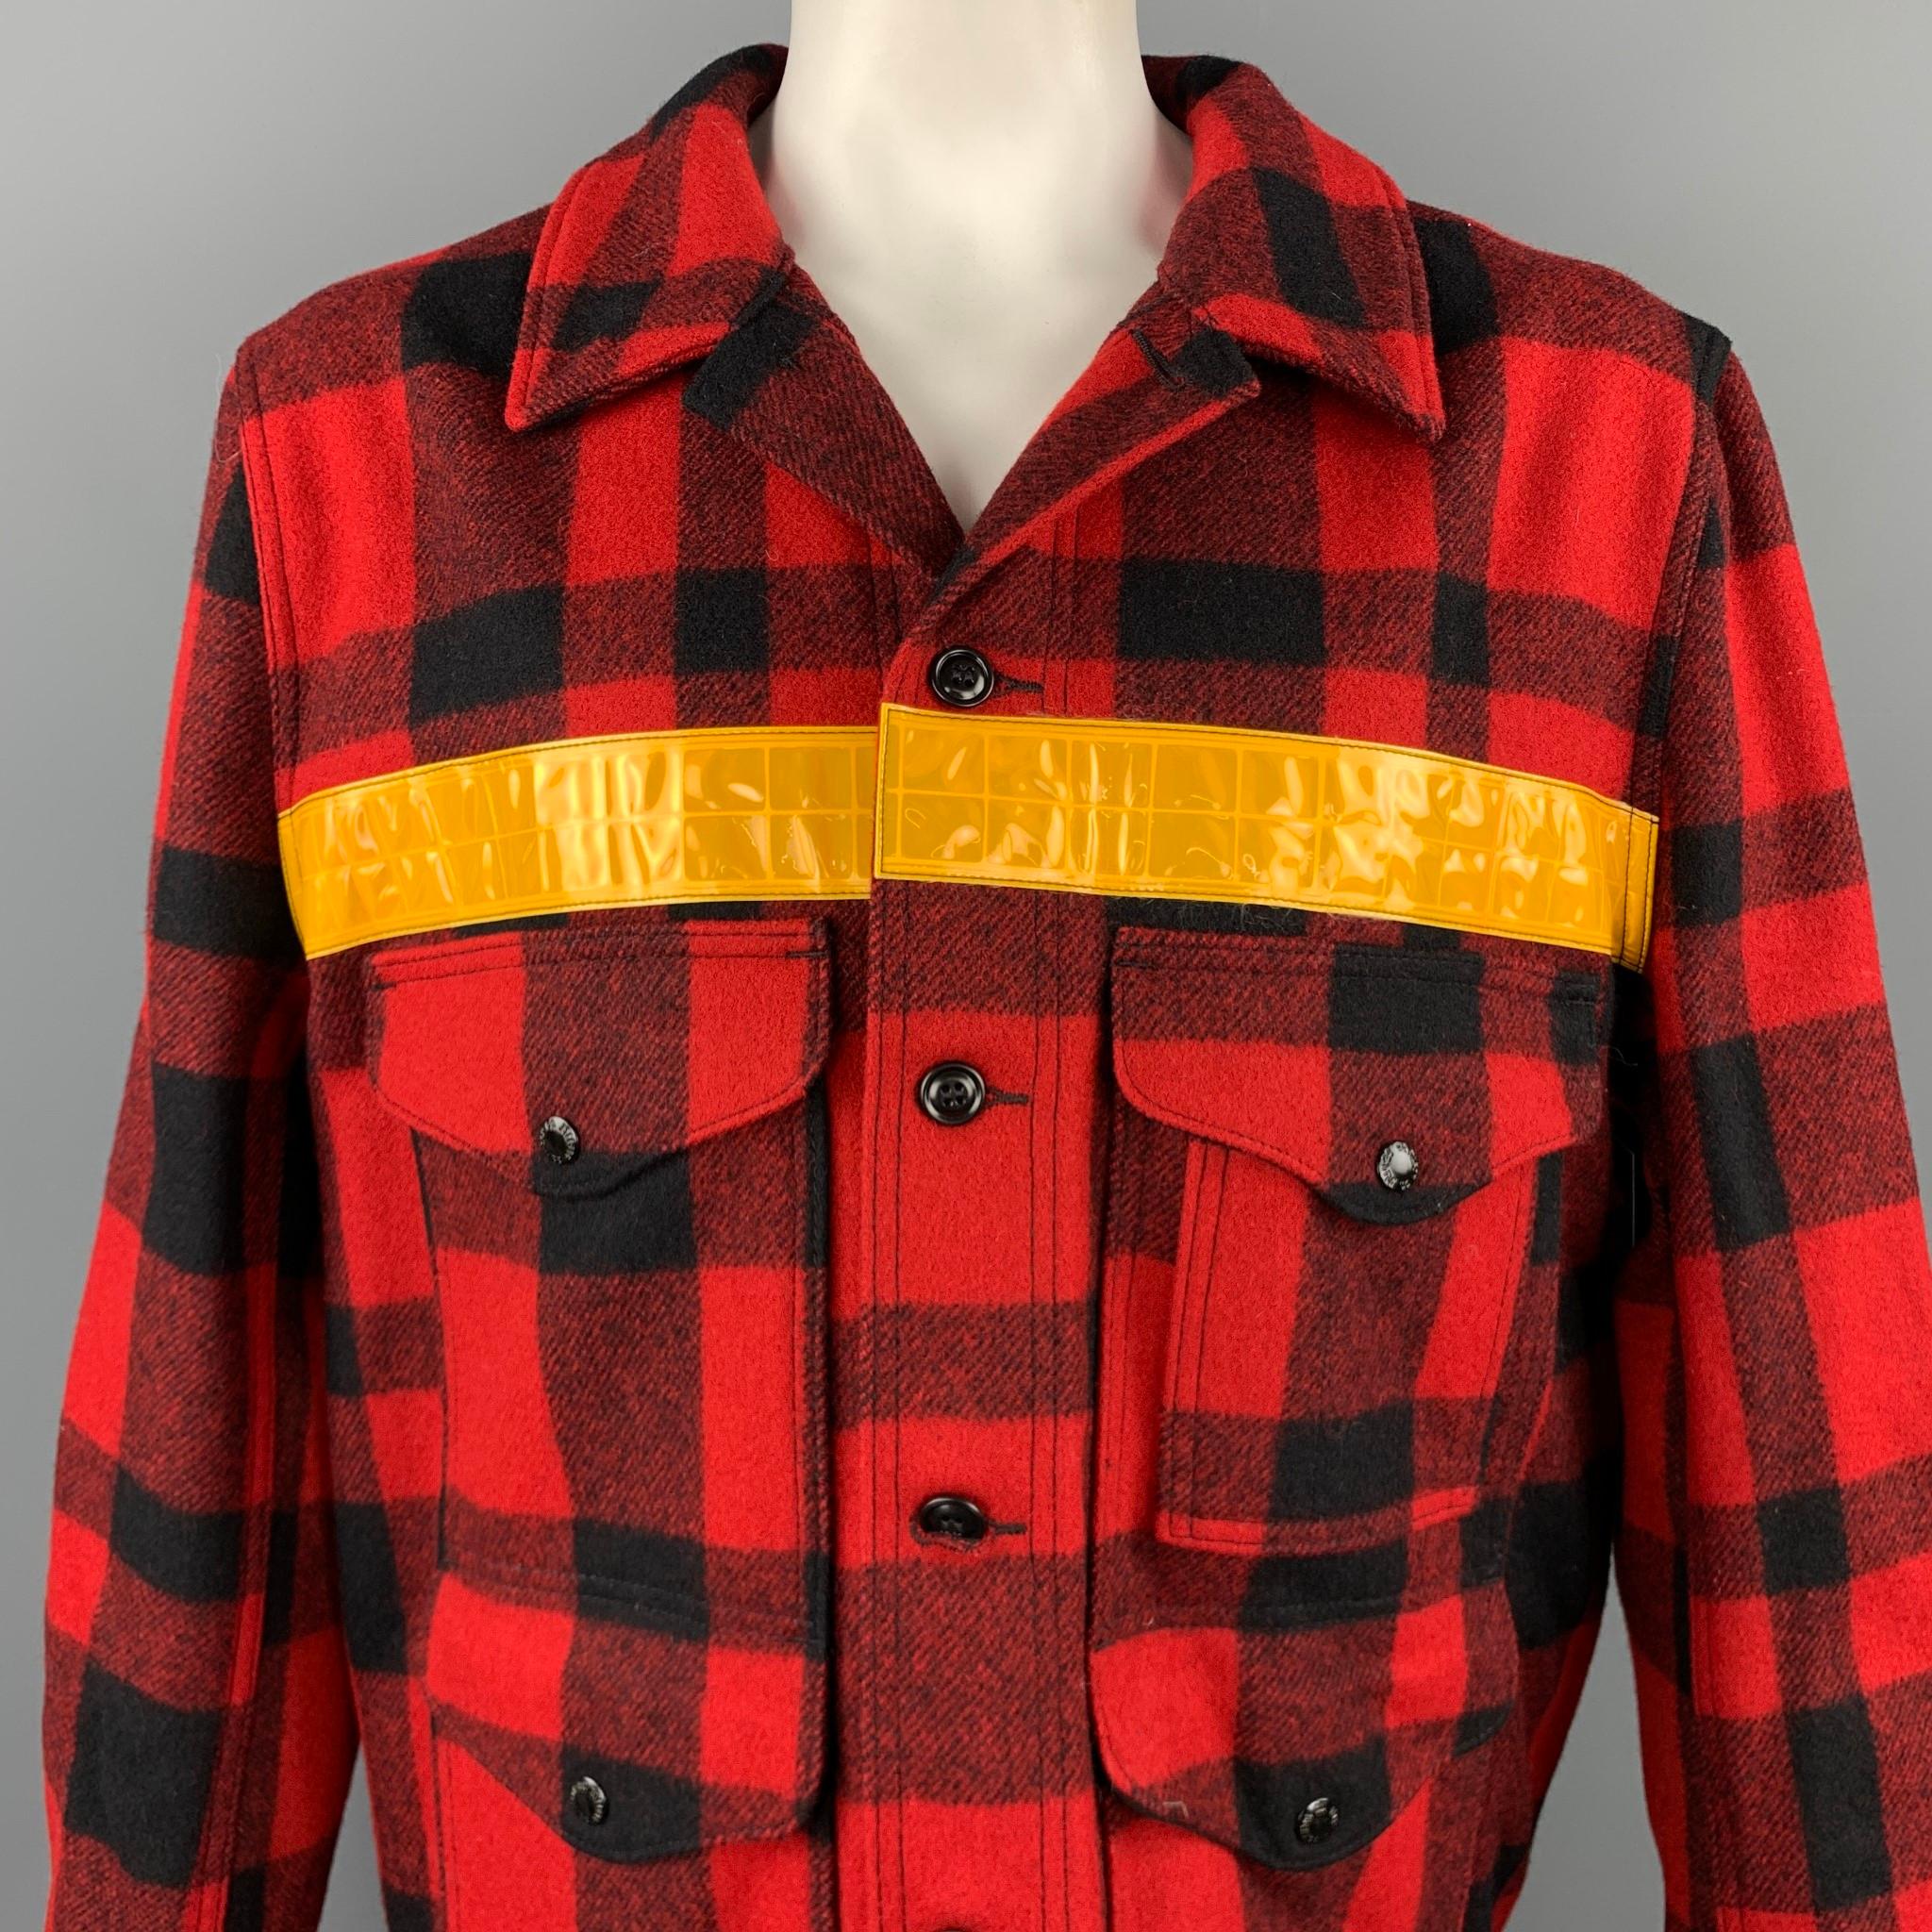 JUNYA WATANABE MAN x FILSON jacket comes in a red & black buffalo plaid wool with a yellow reflective stripe detail featuring front patch pockets, leather elbow patches, nylon back, and a buttoned closure.  Made in Japan / USA.

Excellent Pre-Owned